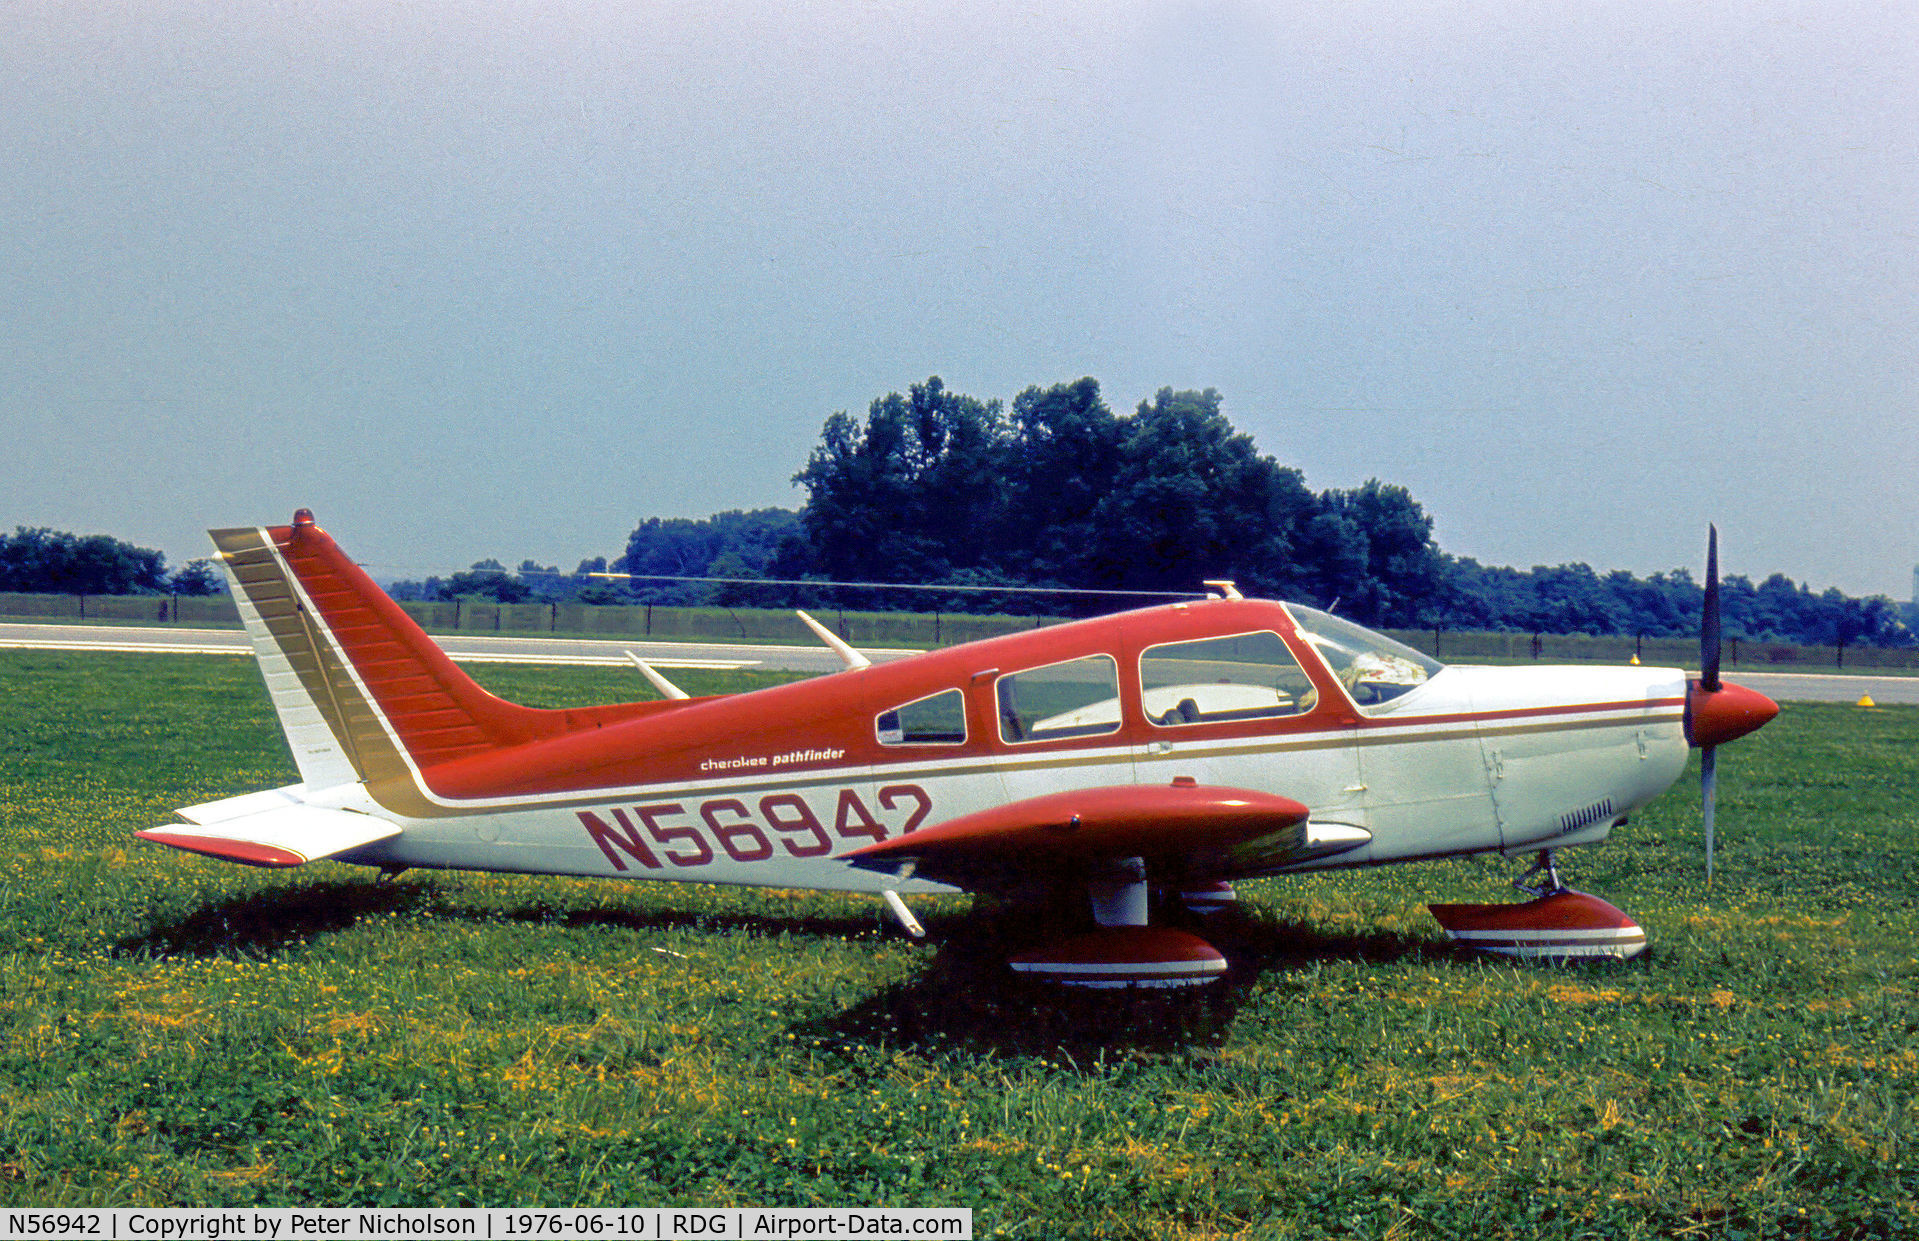 N56942, 1973 Piper PA-28-235 C/N 28-7410032, PA-28-235 Cherokee Pathfinder as seen at the 1976 Reading Airshow.